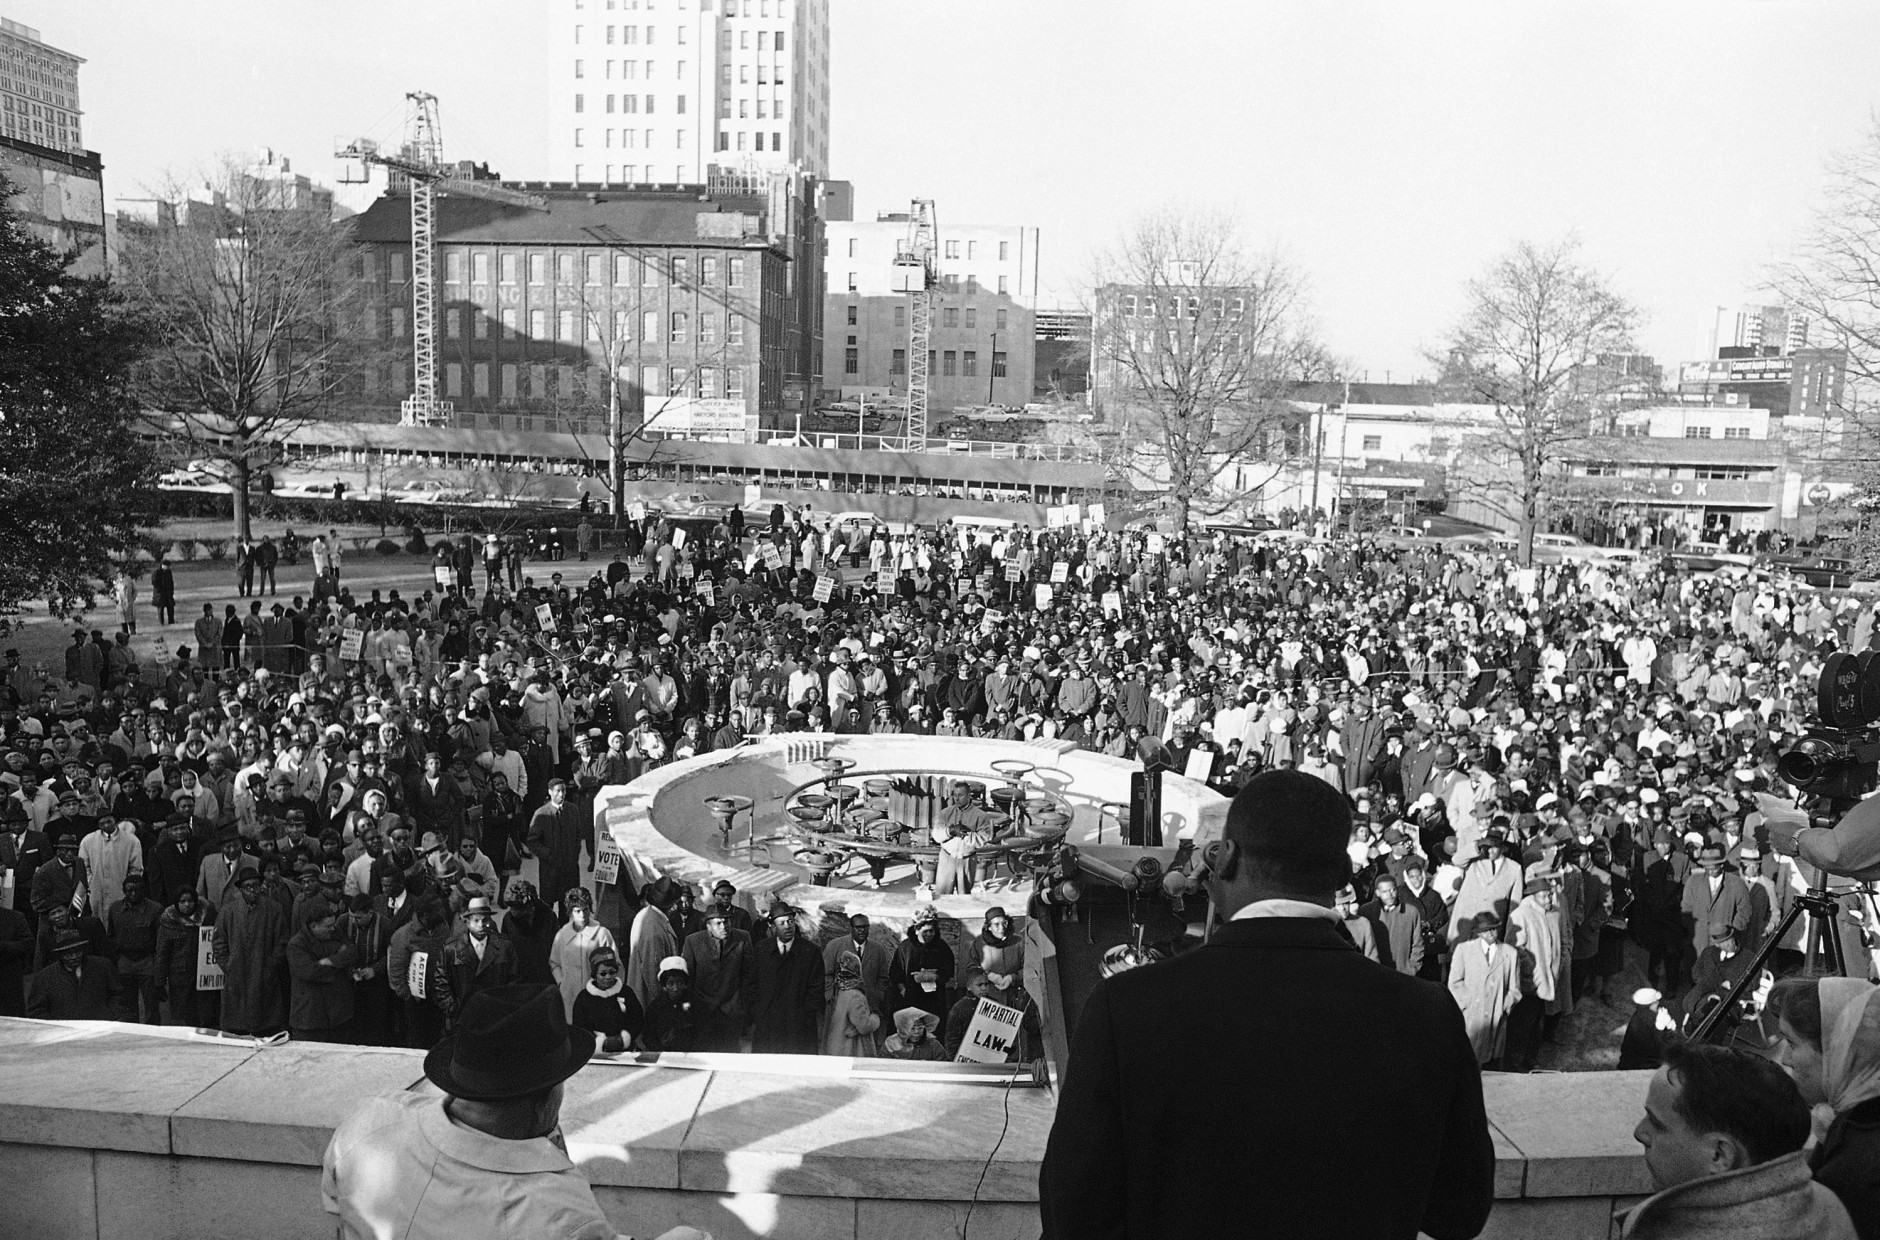 Dr. Martin Luther King Jr., President of the Southern Christian Leadership Conference, is heavily guarded as he speaks to an estimated crowd of 2,500 who braved freezing weather to attend an anti-segregation rally in downtown Hurt Park in Atlanta Sunday, Dec. 16, 1963. Police said the integration leaders life had not been threatened, but the officers were a precautionary measure. (AP Photo/Horace Cort)